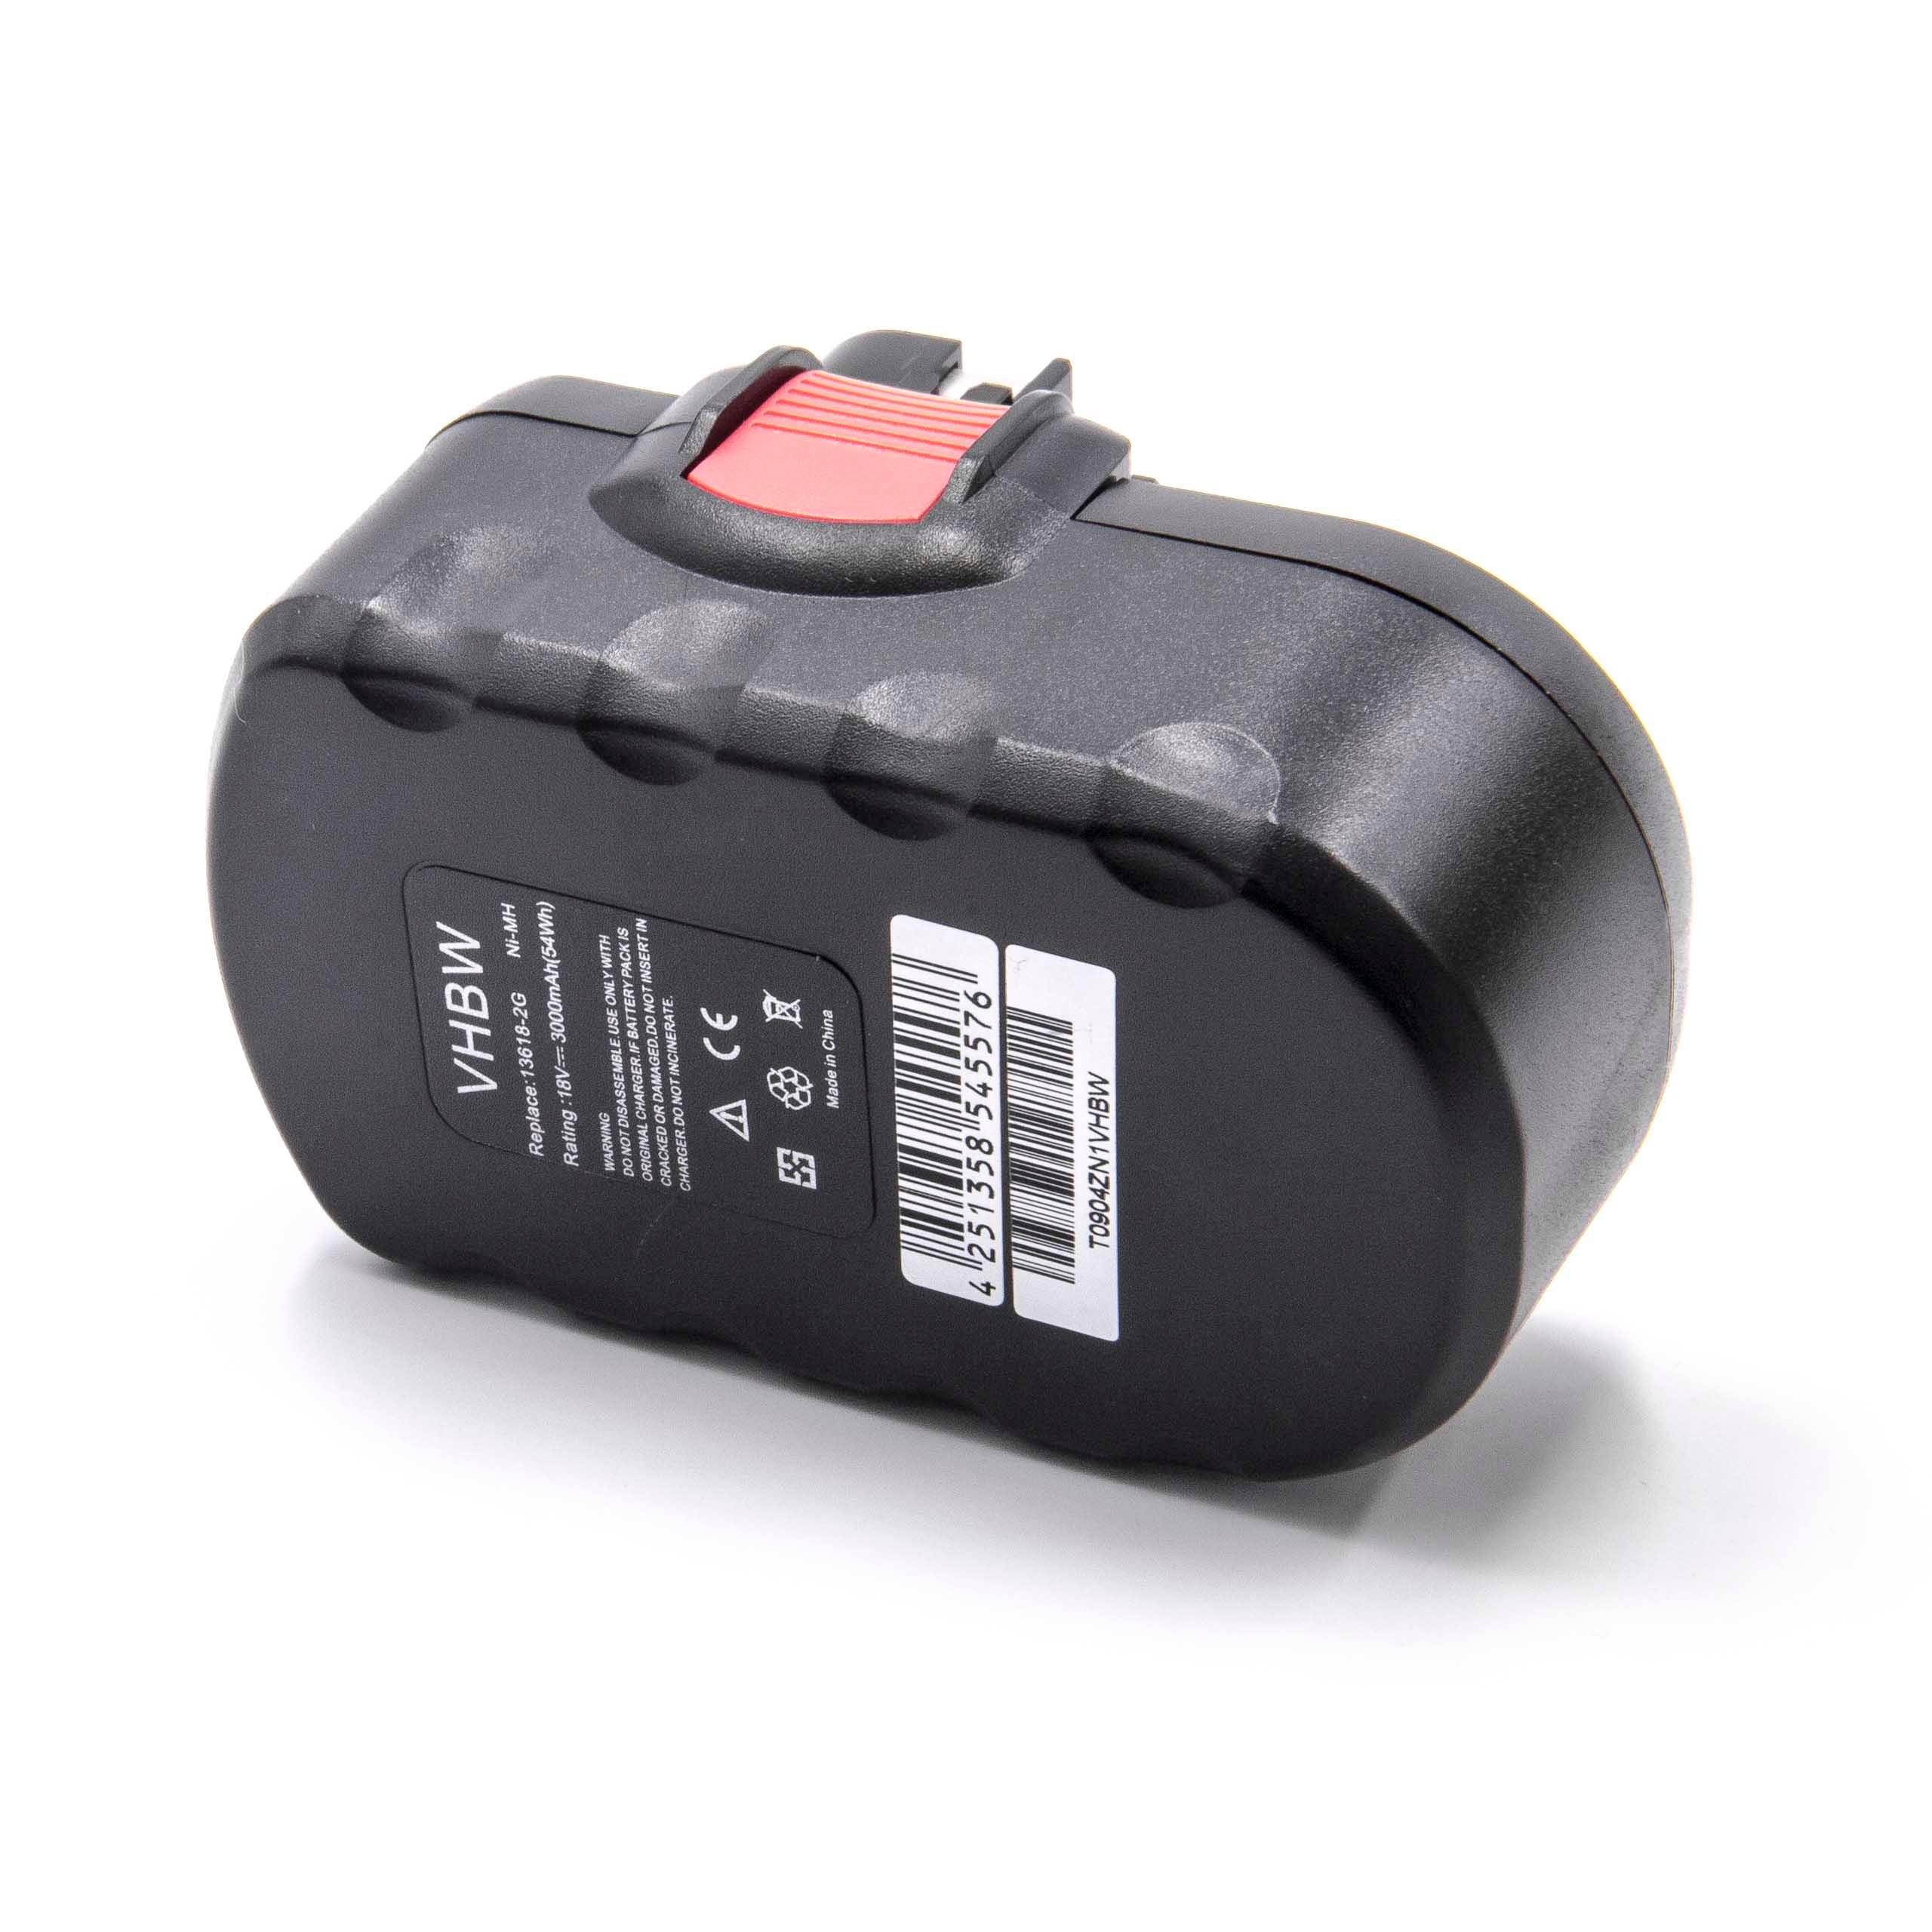 Electric Power Tool Battery Replaces Bosch 2 607 335 278, 2 607 335 266, 2 607 335 536 - 3000 mAh, 18 V, NiMH